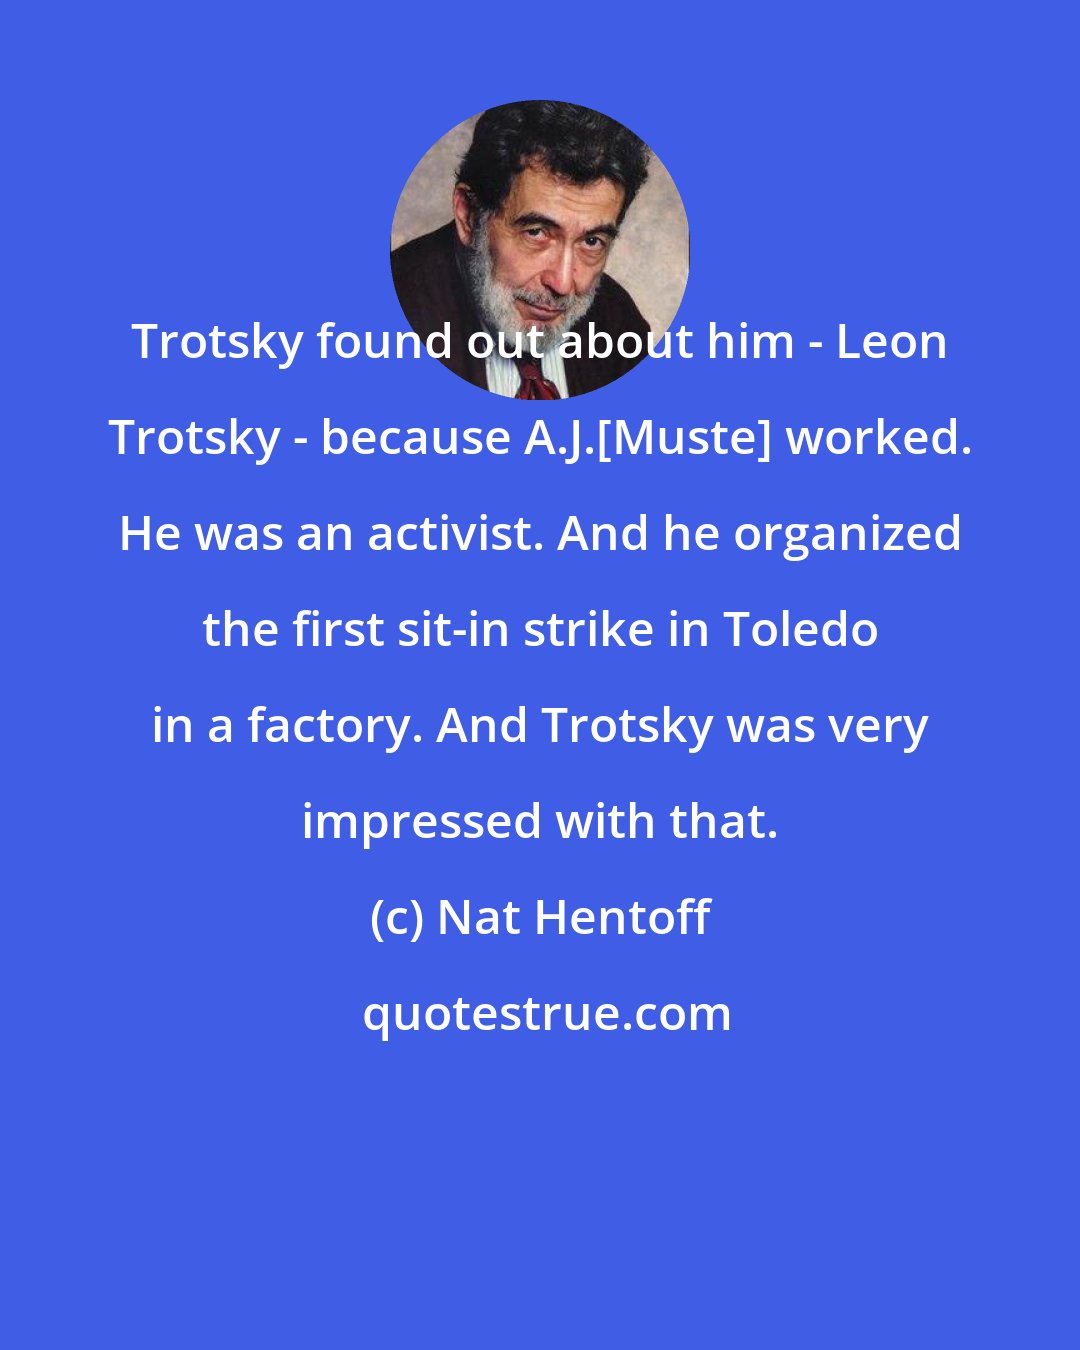 Nat Hentoff: Trotsky found out about him - Leon Trotsky - because A.J.[Muste] worked. He was an activist. And he organized the first sit-in strike in Toledo in a factory. And Trotsky was very impressed with that.